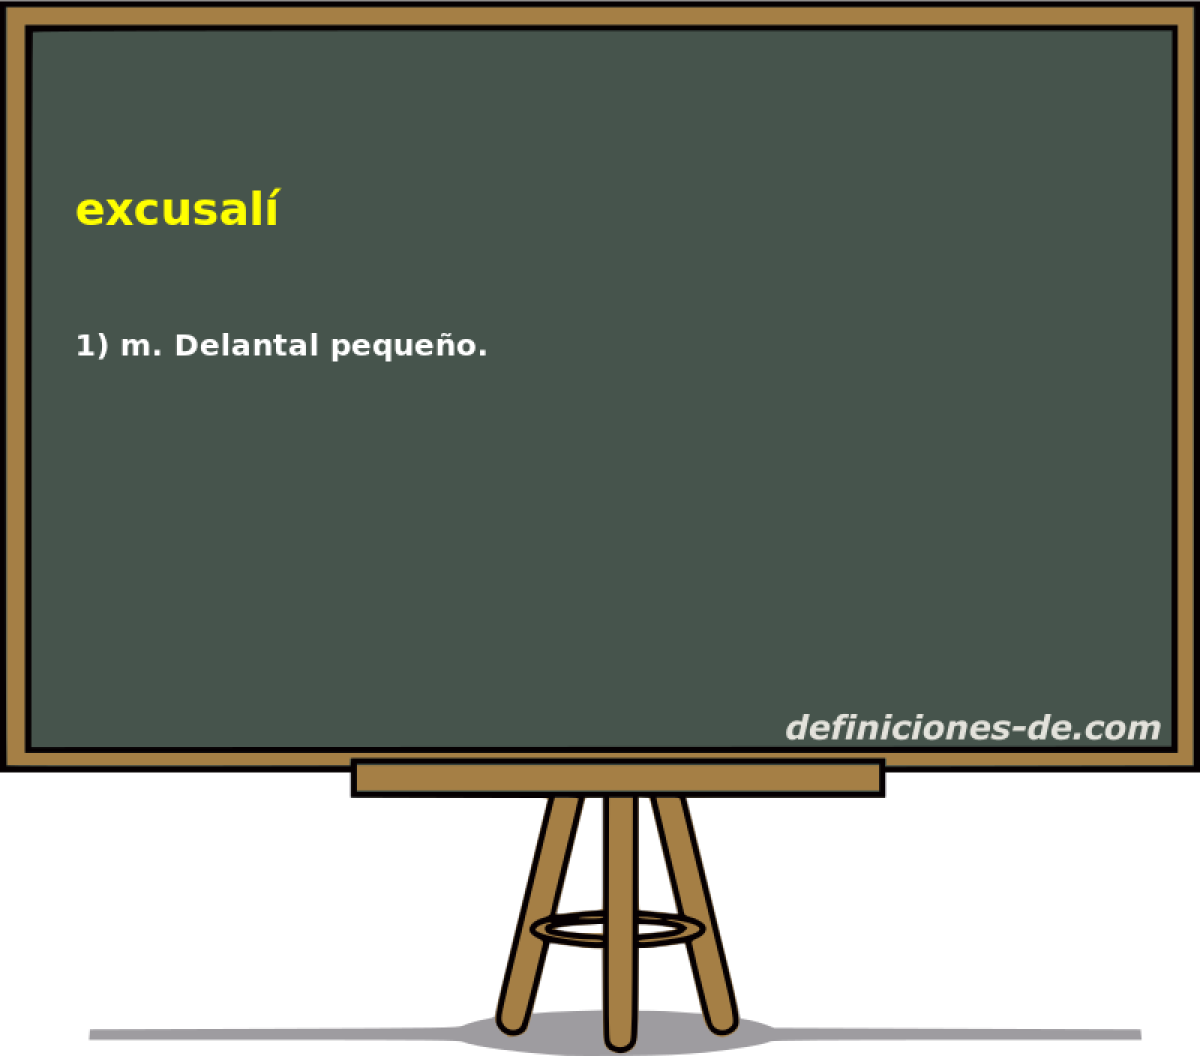 excusal 